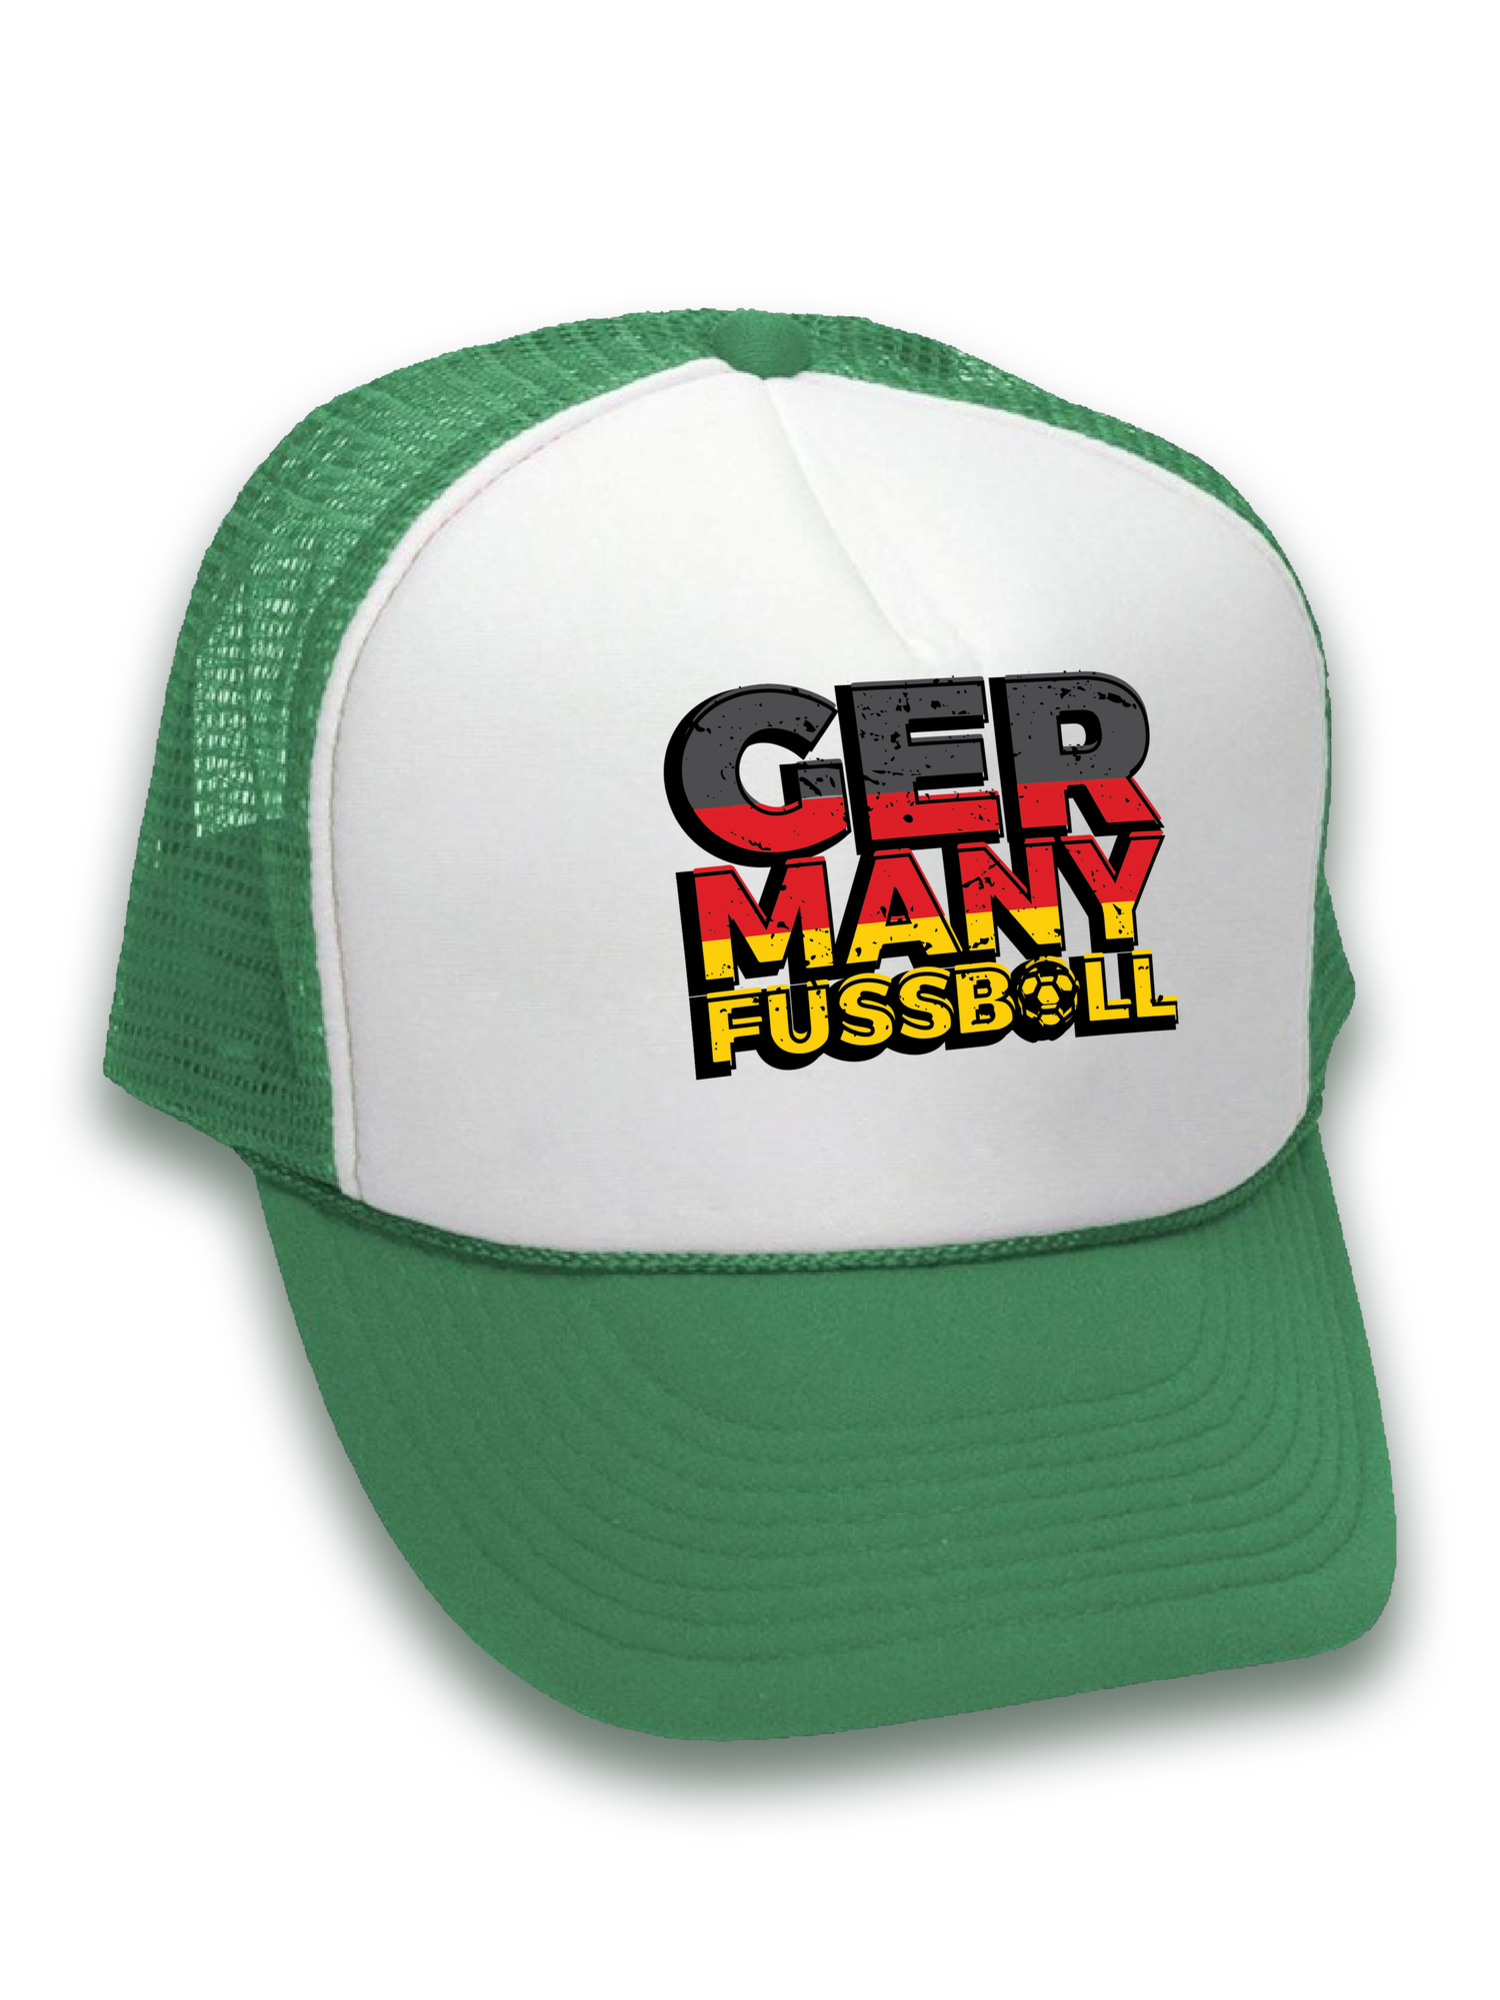 Awkward Styles Germany Fussball Hat Germany Trucker Hats for Men and Women Hat Gifts from Germany German Soccer Cap German Hats Unisex Germany Snapback Hat Germany 2018 Trucker Hats German Soccer Hat - image 2 of 6